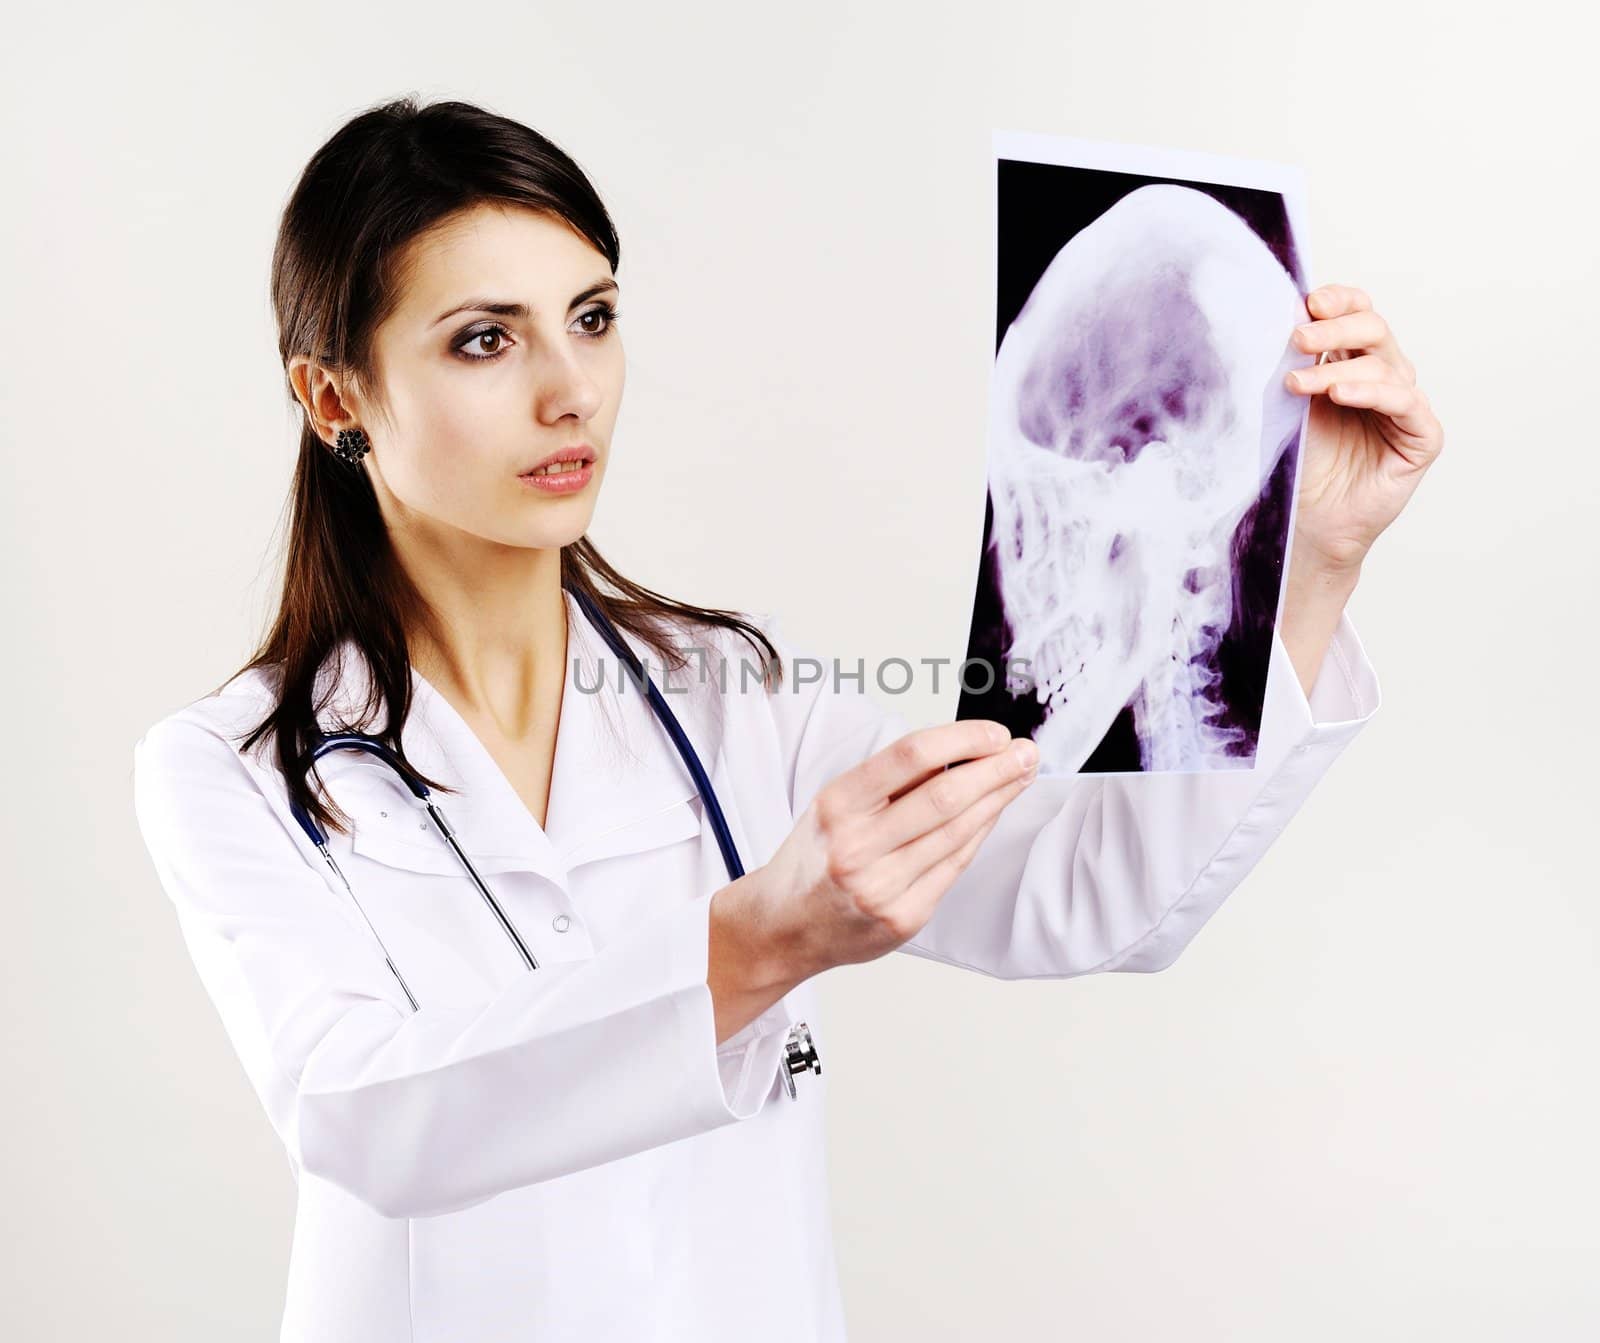 An image of female doctor examing x-ray of scull